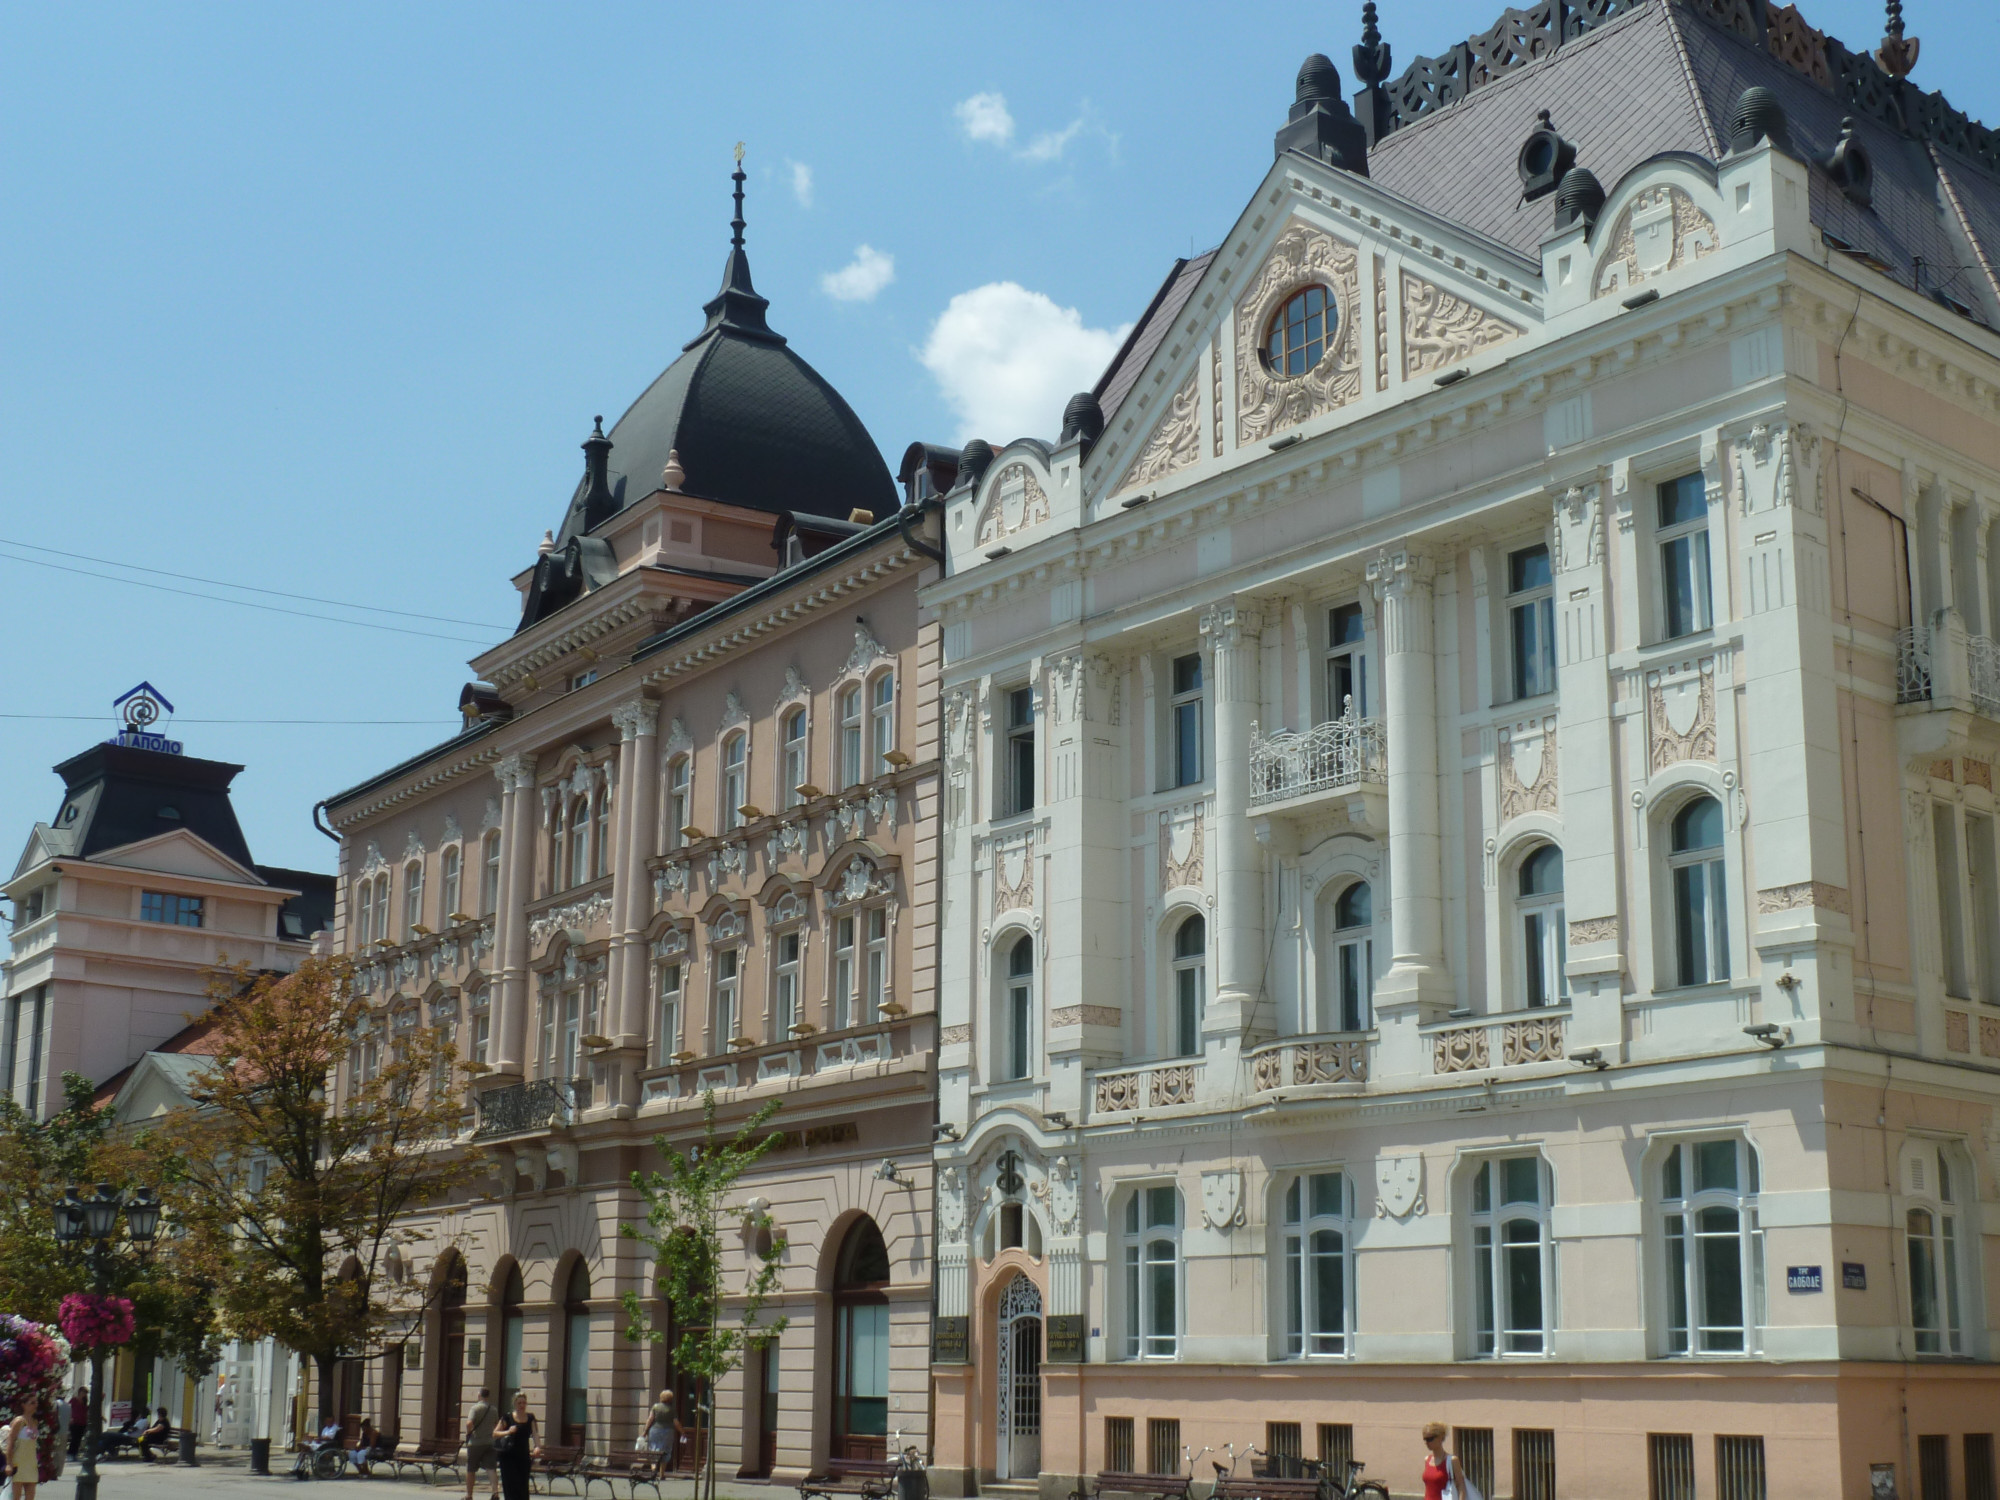 Late 19th century buildings, Art Nouveau style, at Trg Slobode (Liberty Square)